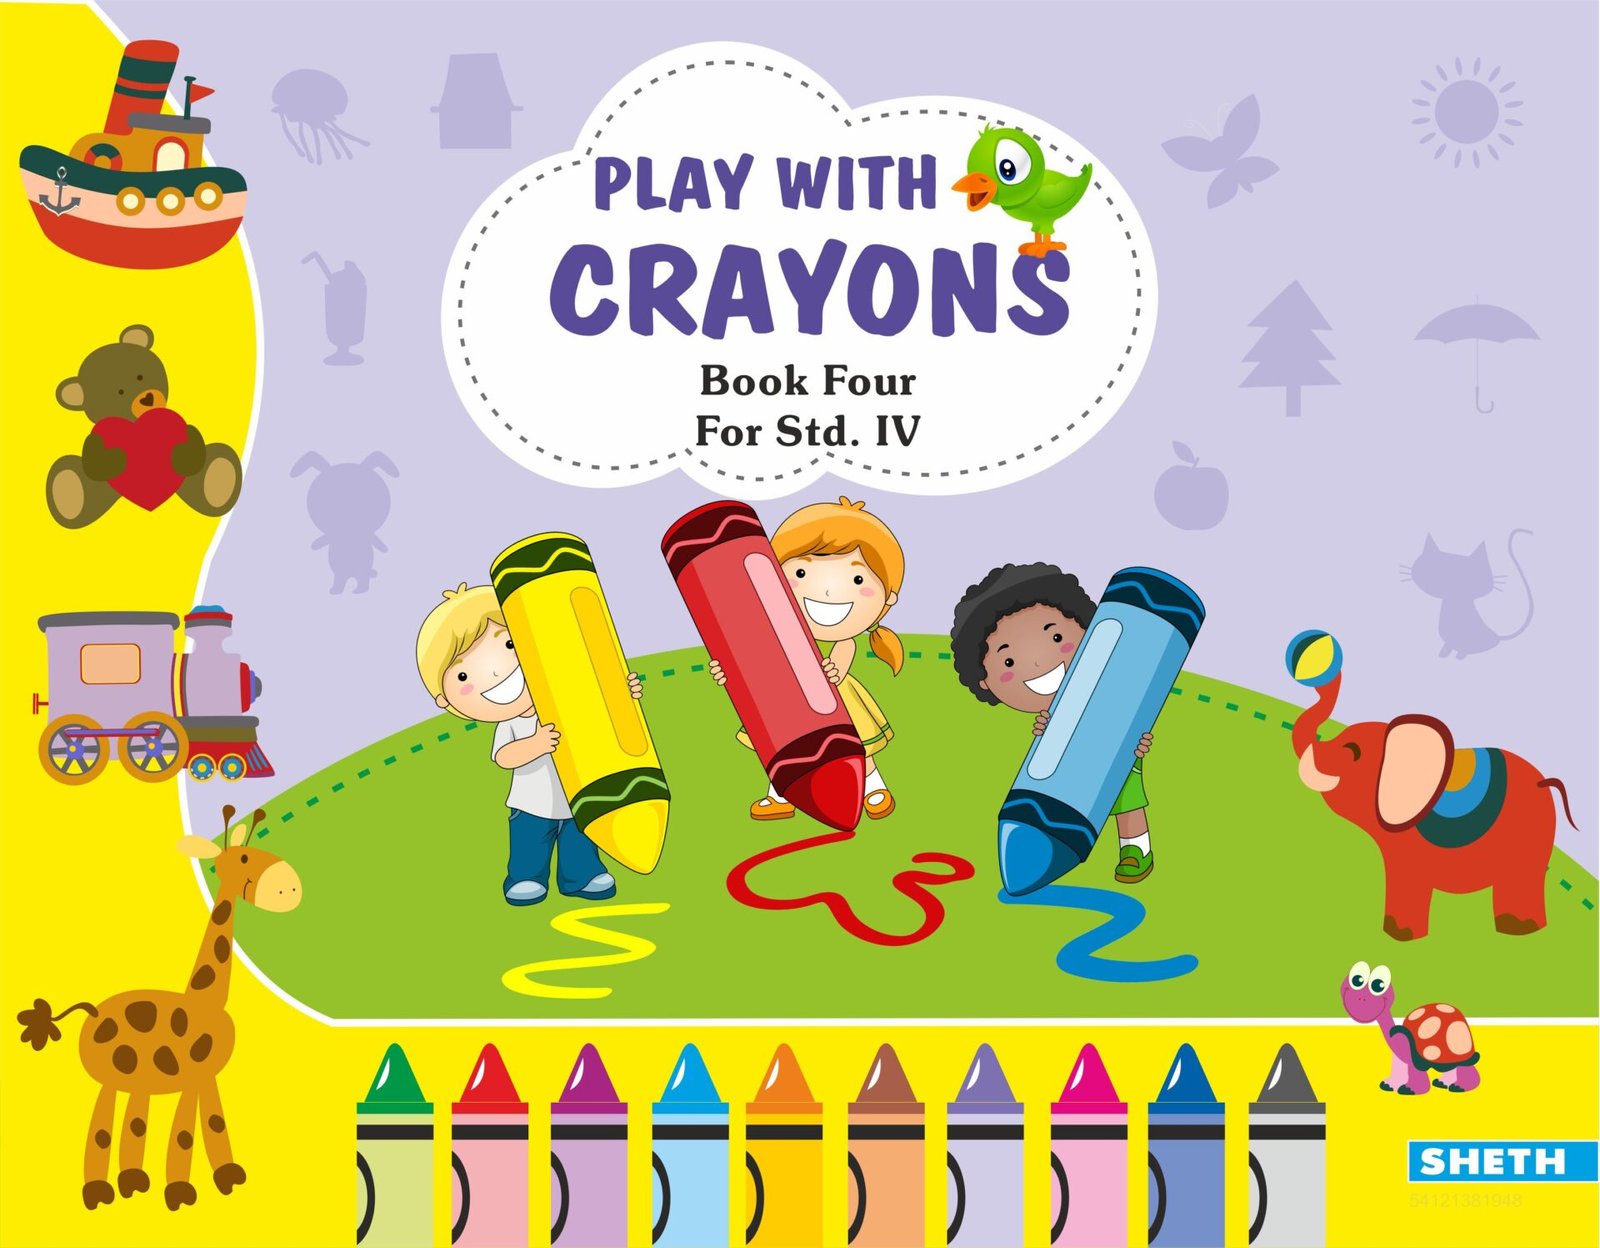 Sheth Books Play with Crayons Book 4 for Std. IV 1